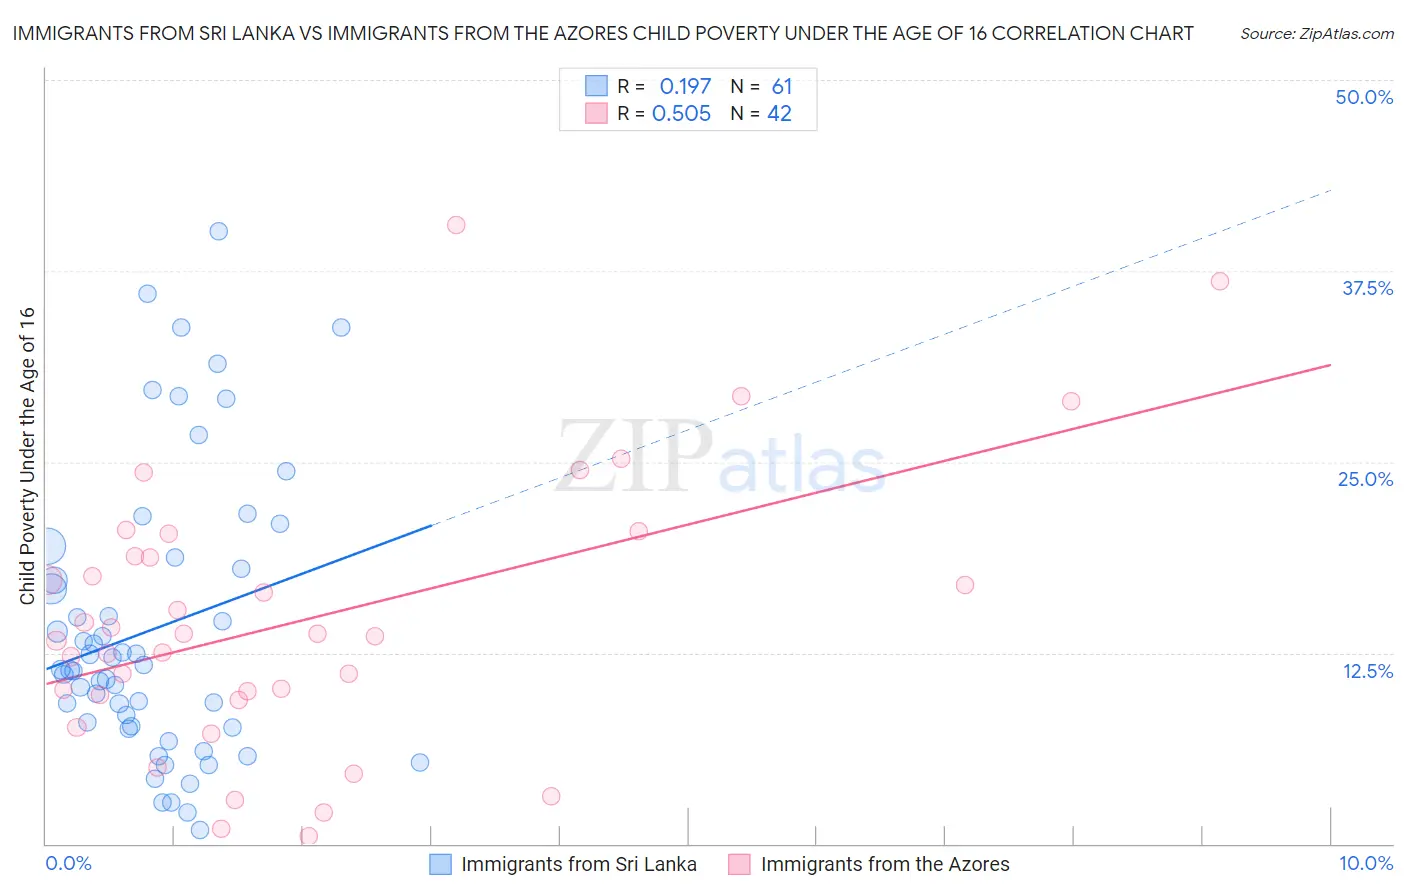 Immigrants from Sri Lanka vs Immigrants from the Azores Child Poverty Under the Age of 16